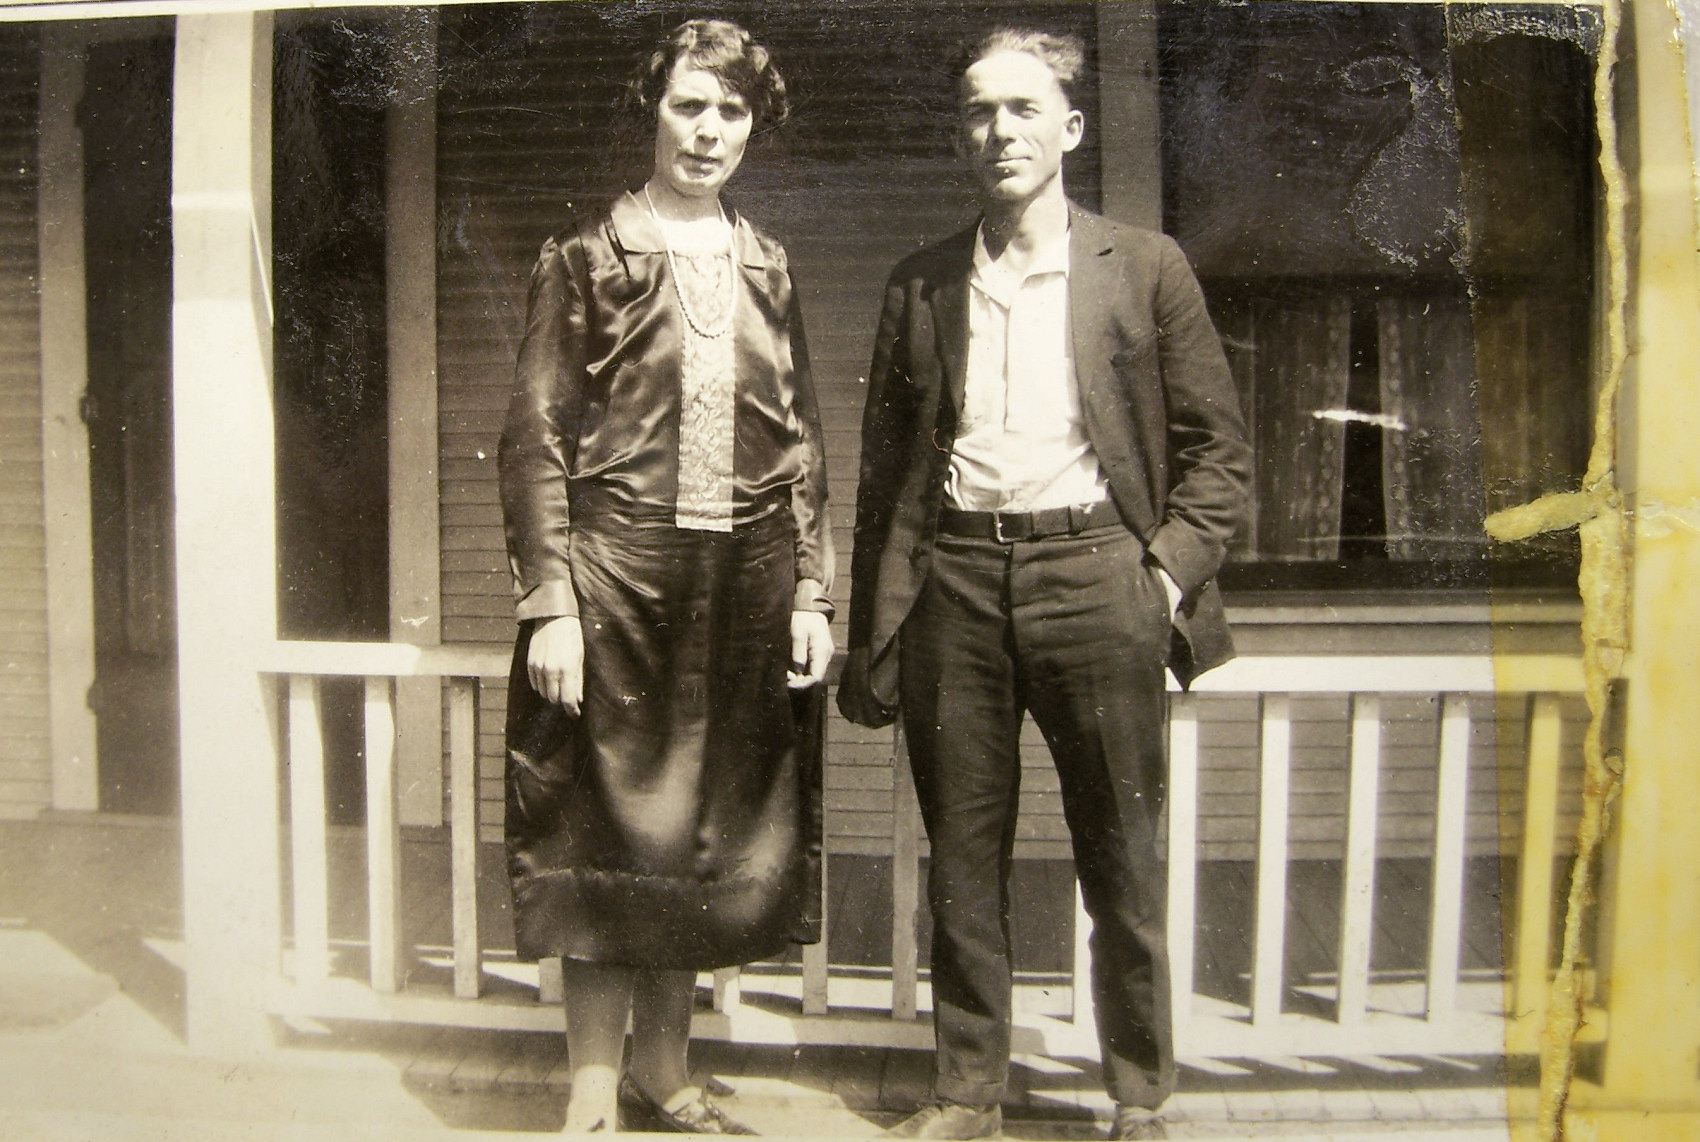 http://upload.wikimedia.org/wikipedia/commons/3/31/Vintage_man_and_woman.jpg